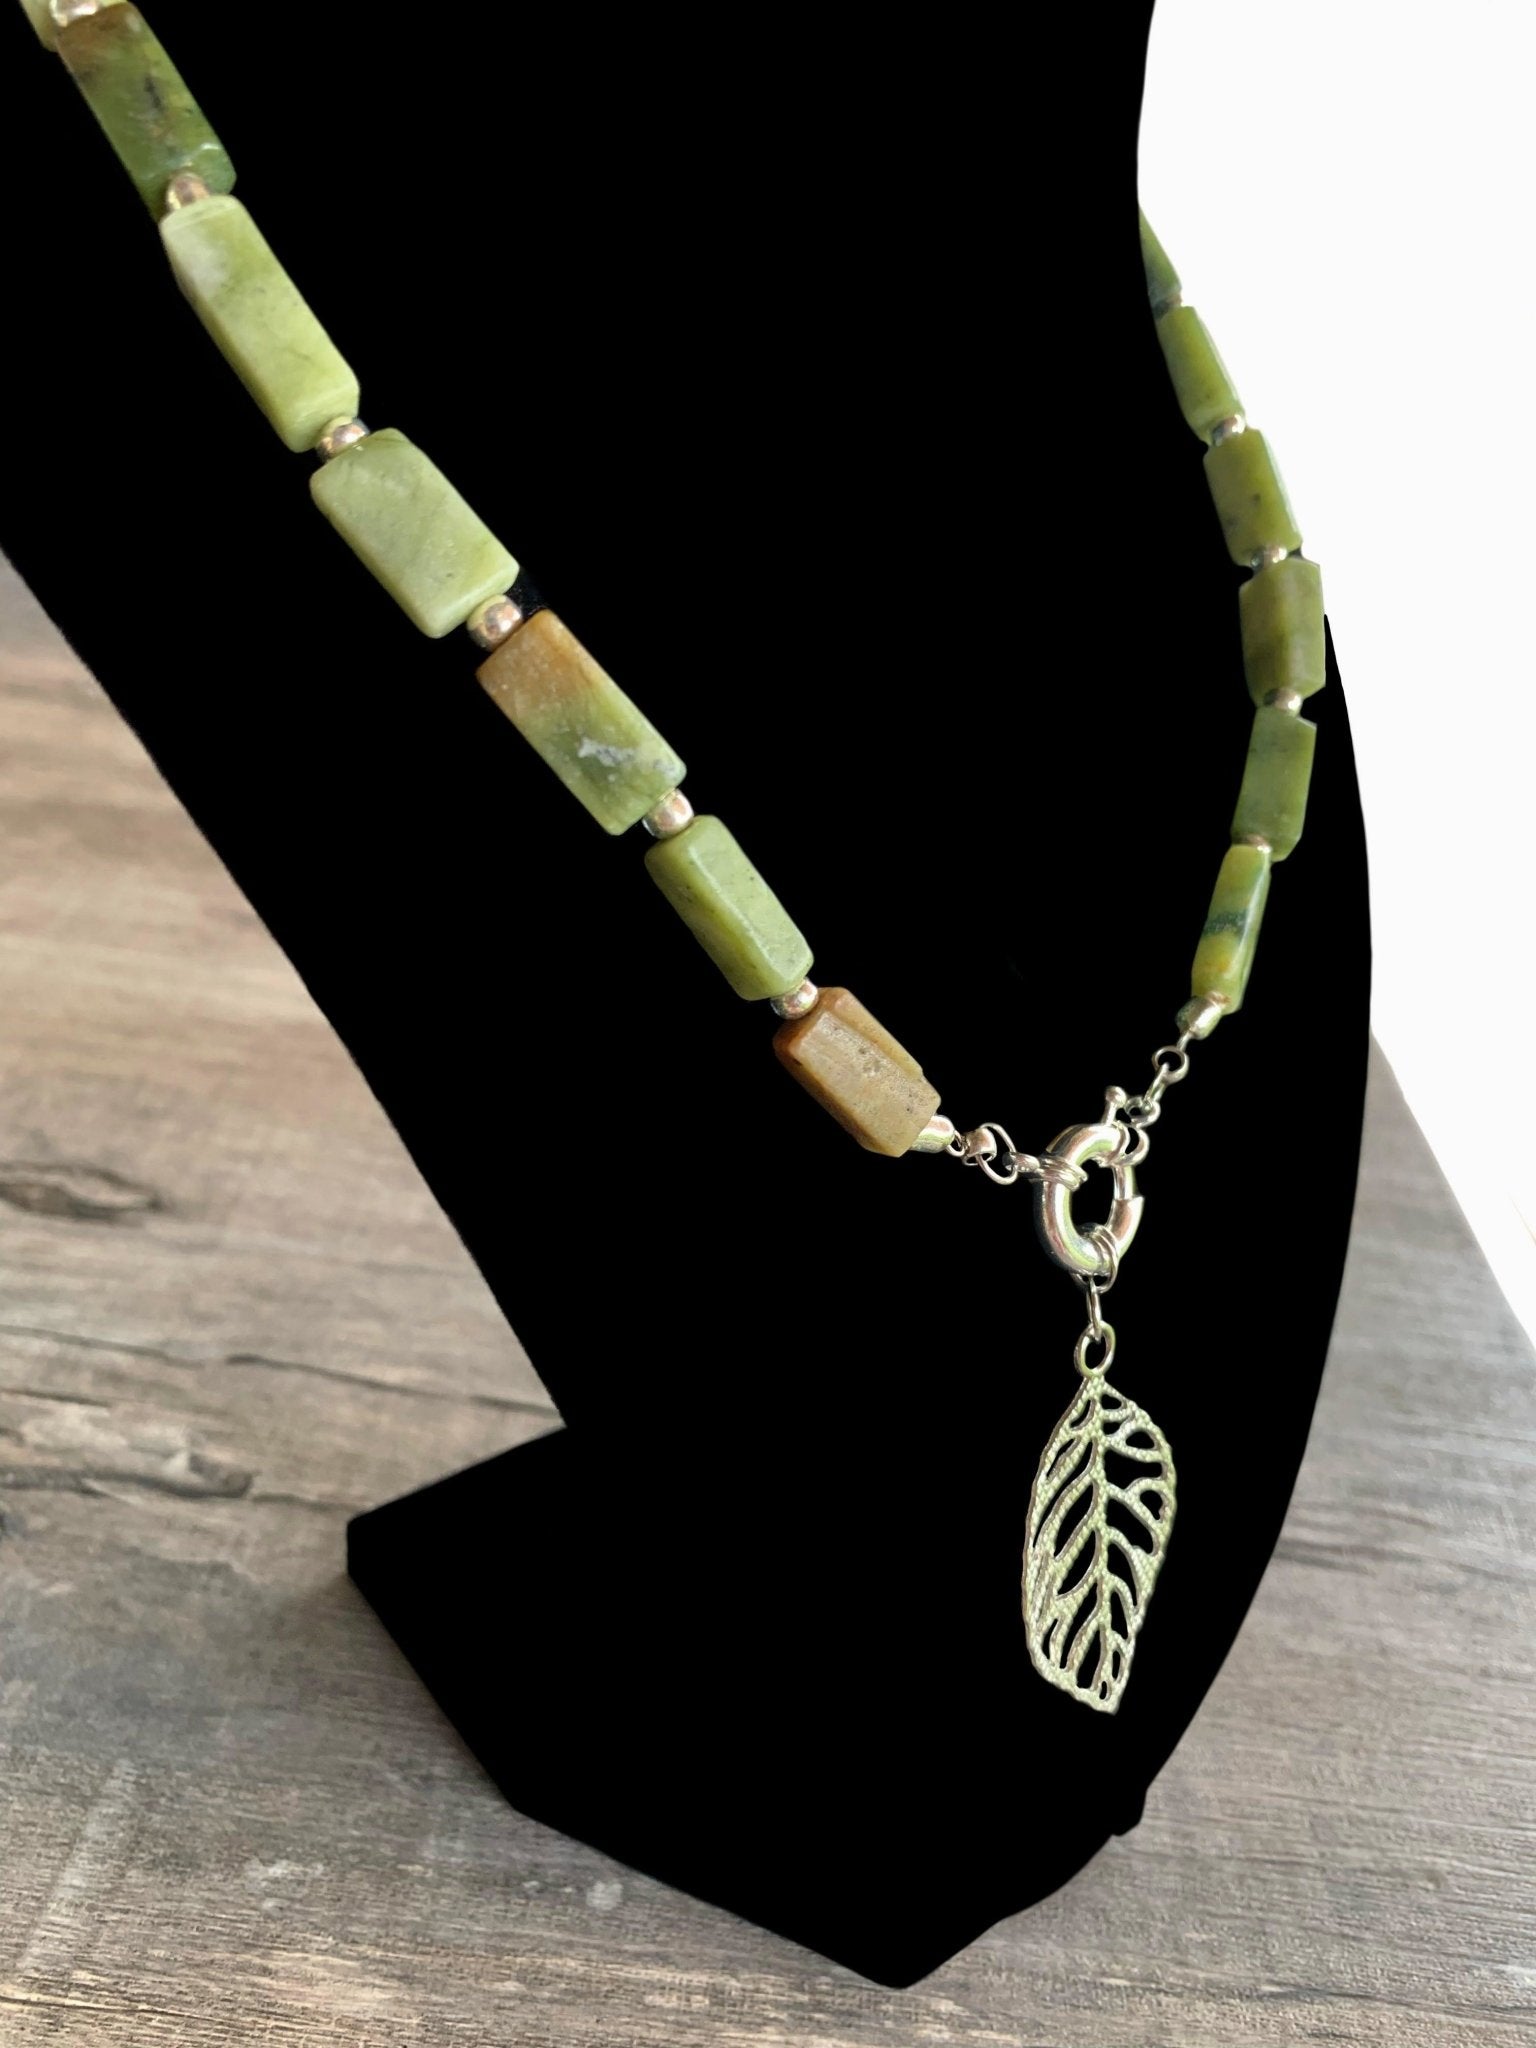 Harmony Hand Made New Jade (Serpentine) Necklace with Silver Plated Leaf Pendant - Born Mystics